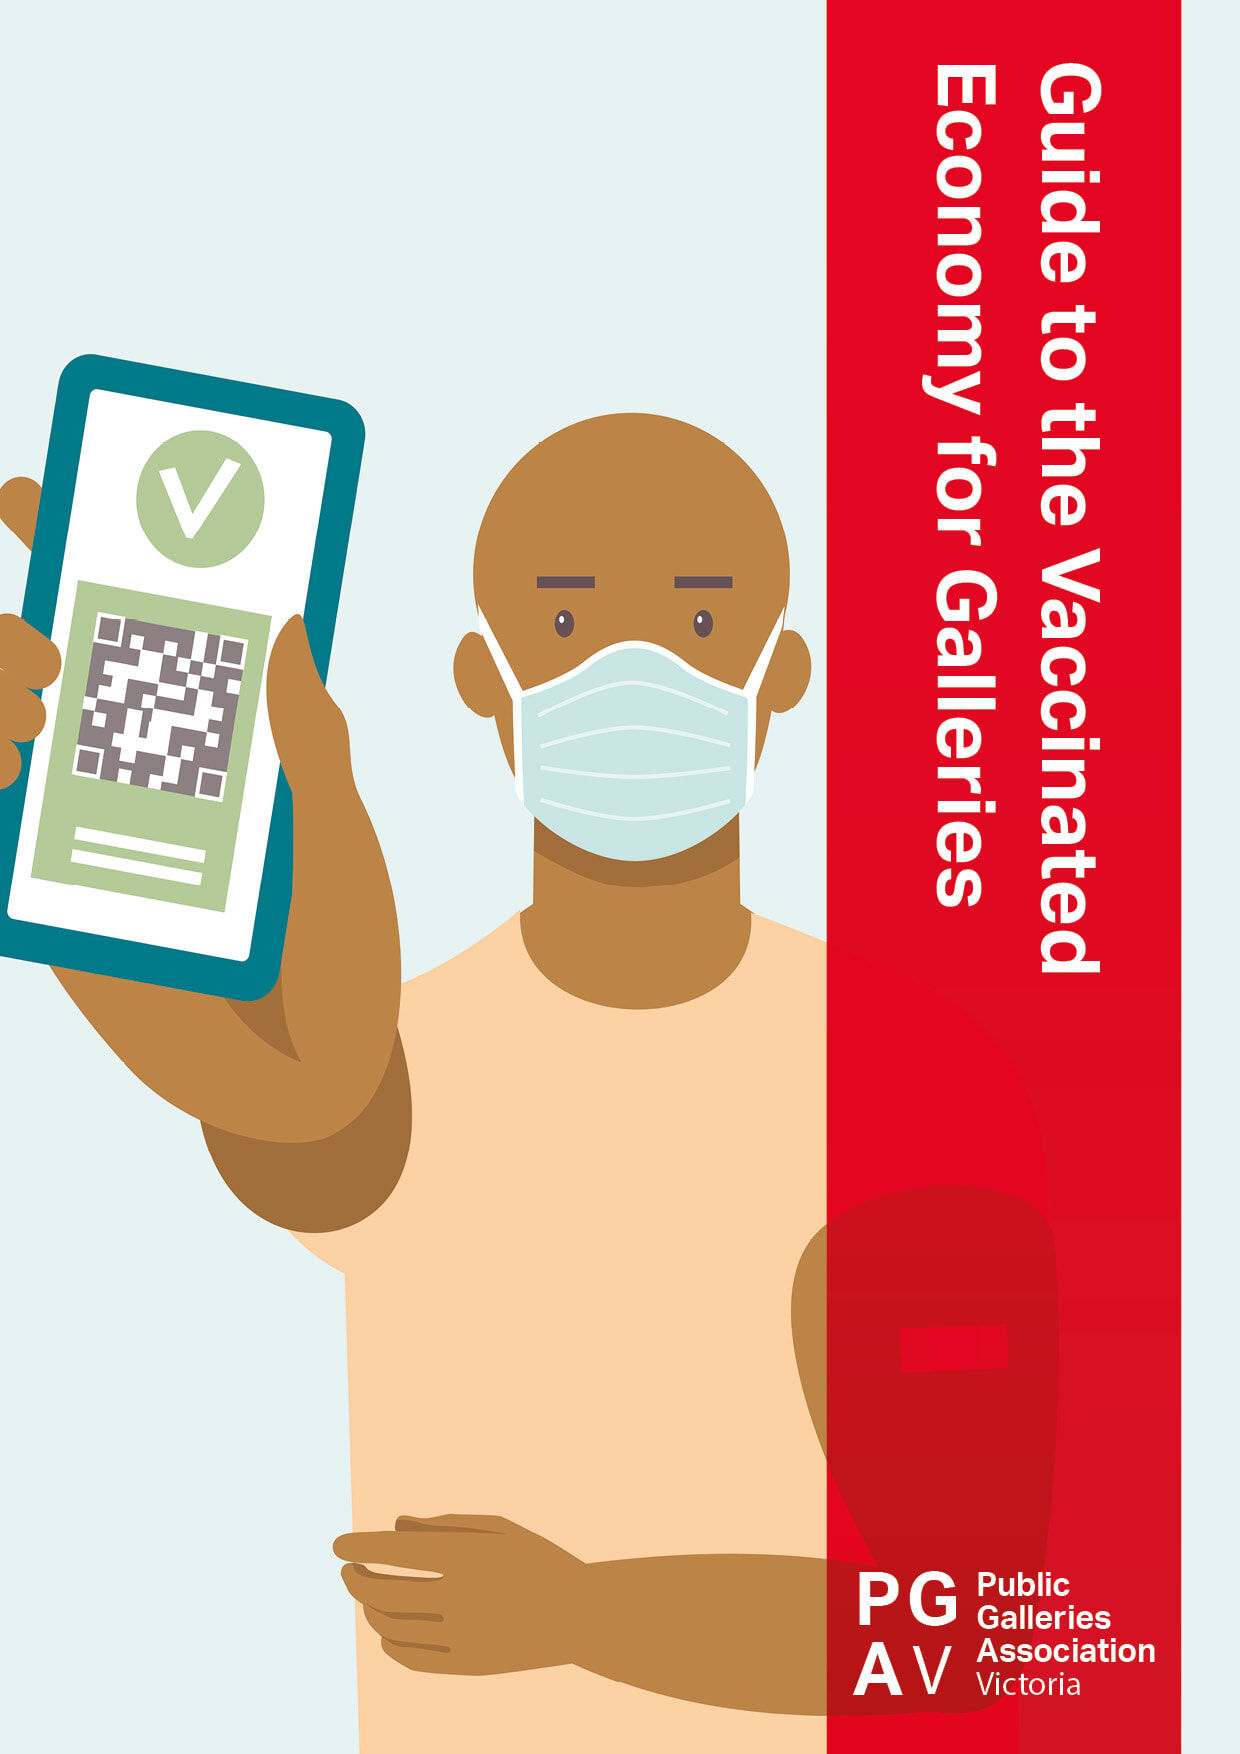 Cover of the PGAV Guide to the Vaccinated Economy for Galleries. Image shows a graphic of a bald man with brown skin wearing a face mask and holding up a mobile phone with a QR code and a green tick indicating he is vaccinated against COVID-19.